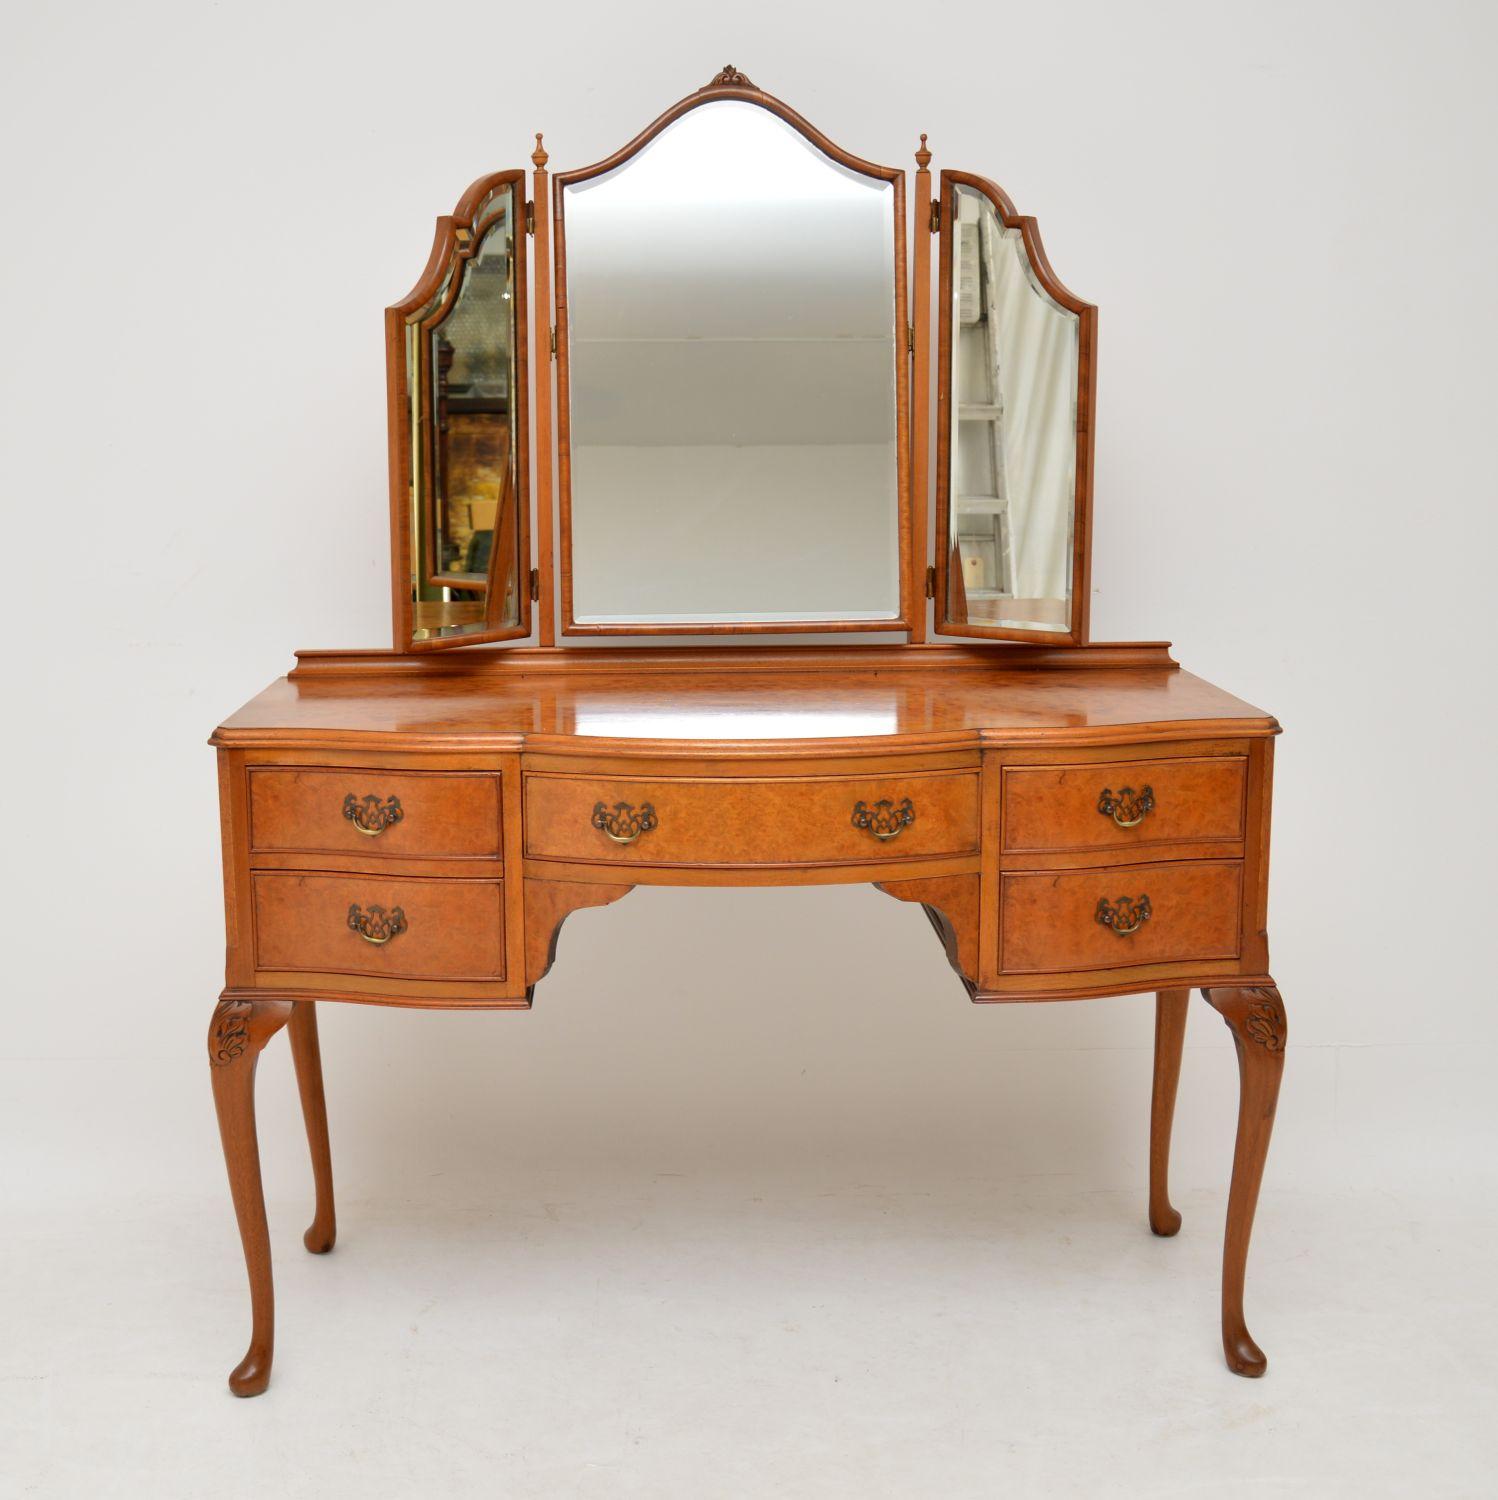 Antique Queen Anne style burr walnut dressing table dating from the 1930s period and in excellent condition. These purpose made dressing tables are becoming very hard to find. Well nice ones like this are anyway. This one has fully adjustable